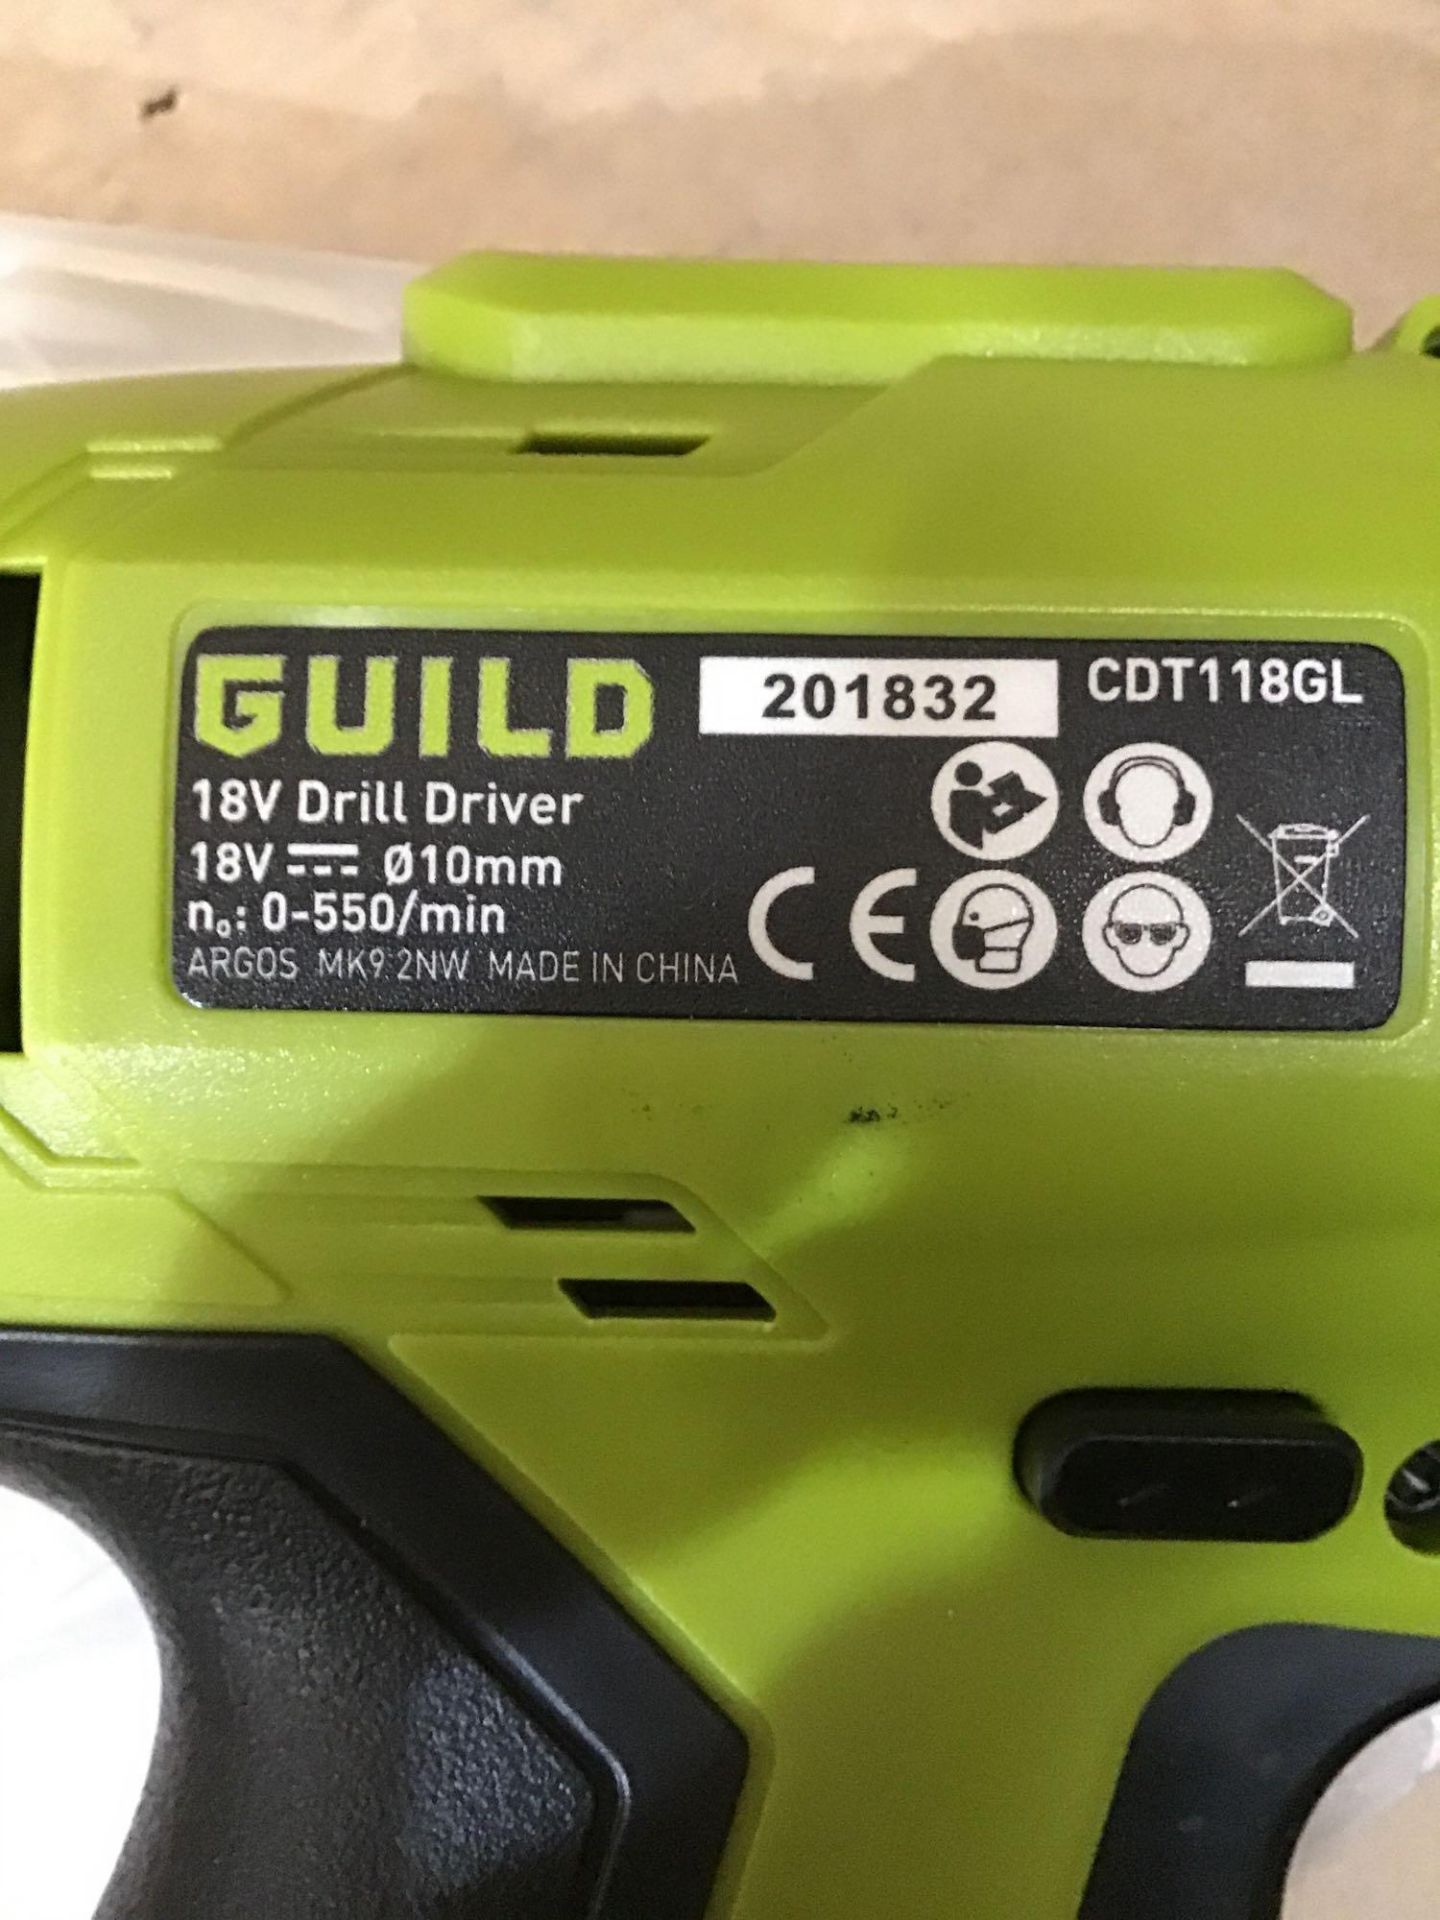 Guild 1.3AH Cordless Drill Driver - 18V, £40.00 RRP - Image 2 of 6